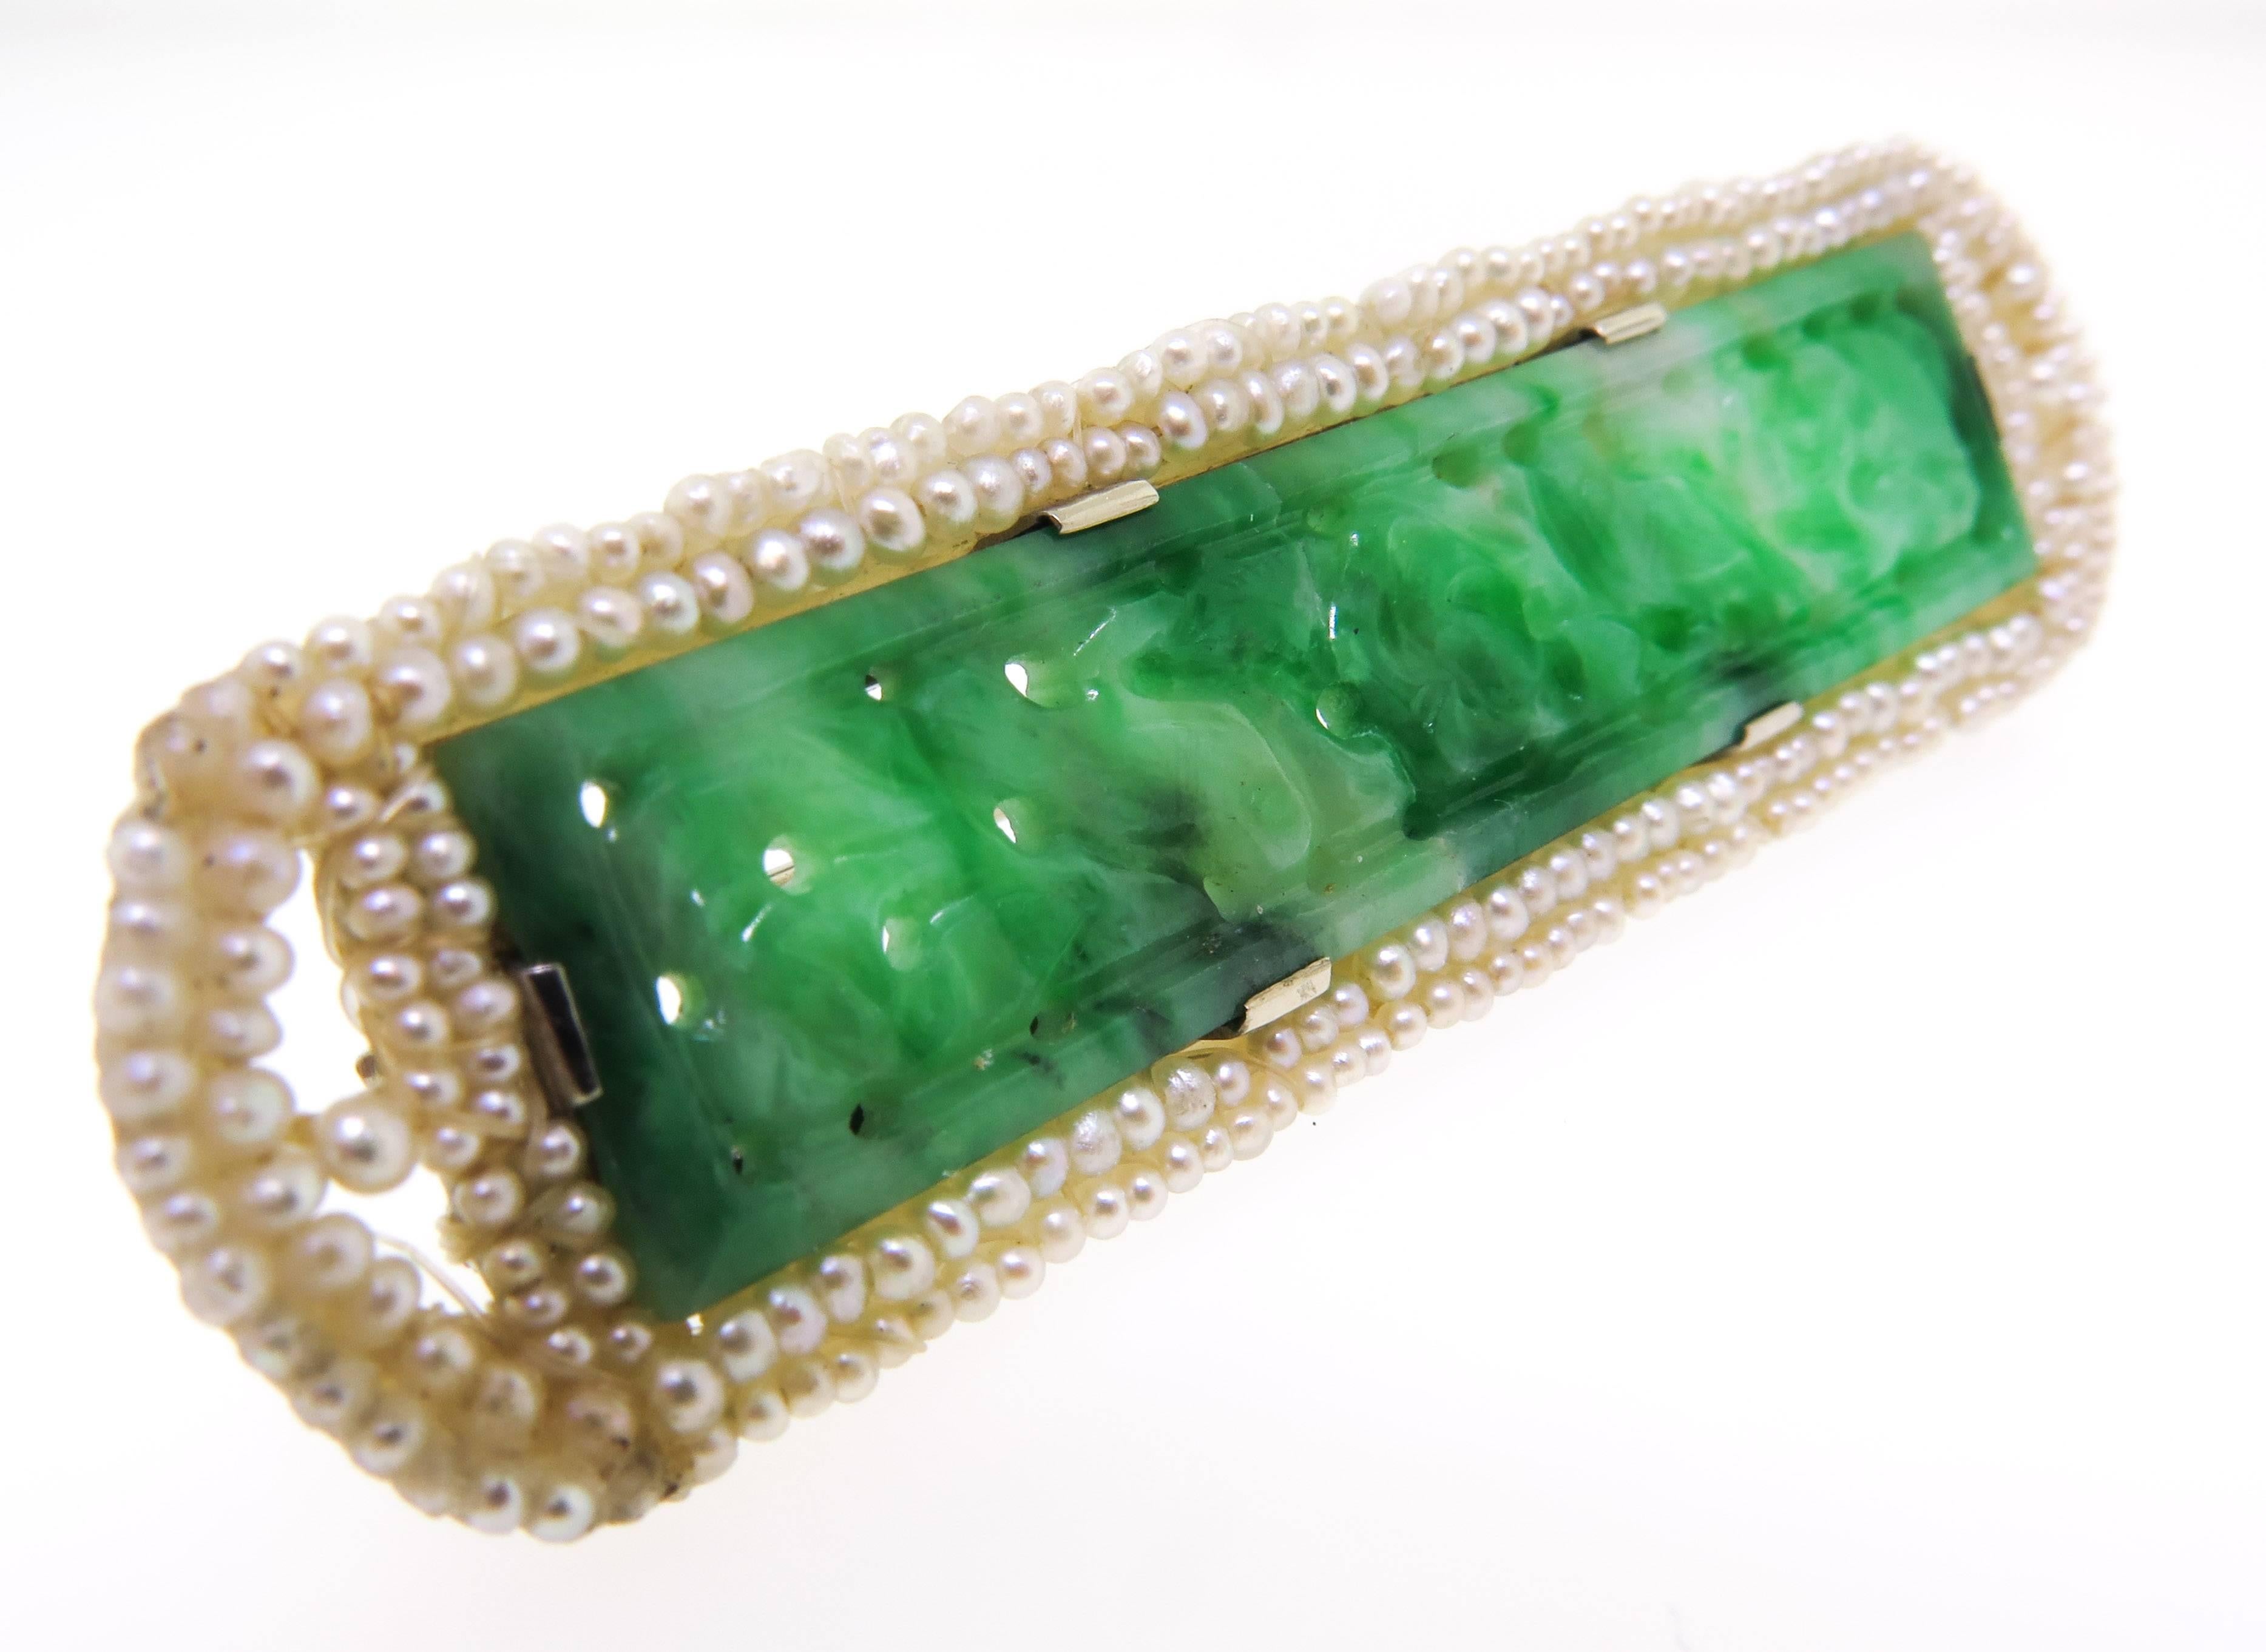 This fine and impressive vintage jade brooch is part of our estate jewelry collection.
The bar style brooch features a pierced decorative design jade, framed by two rows of natural baby sea pearls set in a white gold setting.
Measures 2.5 inches